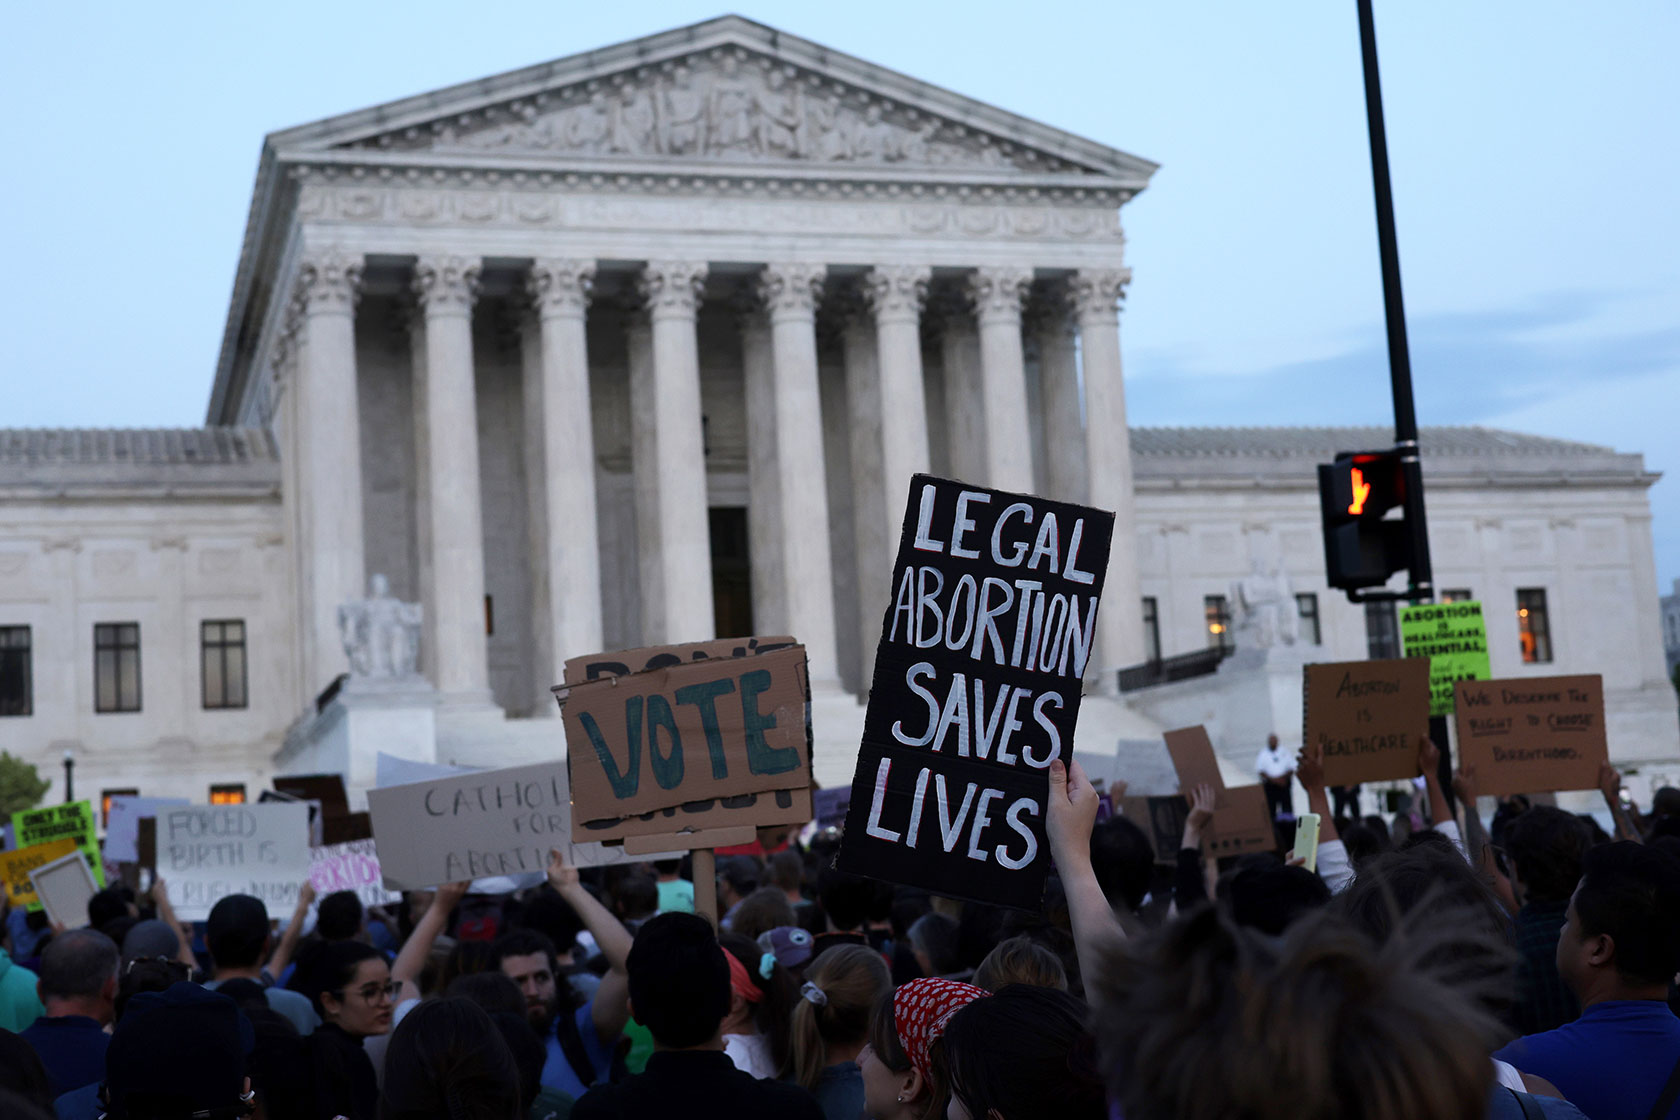 Photo shows a group of people demonstrating in front of the Supreme Court building. One sign reads 